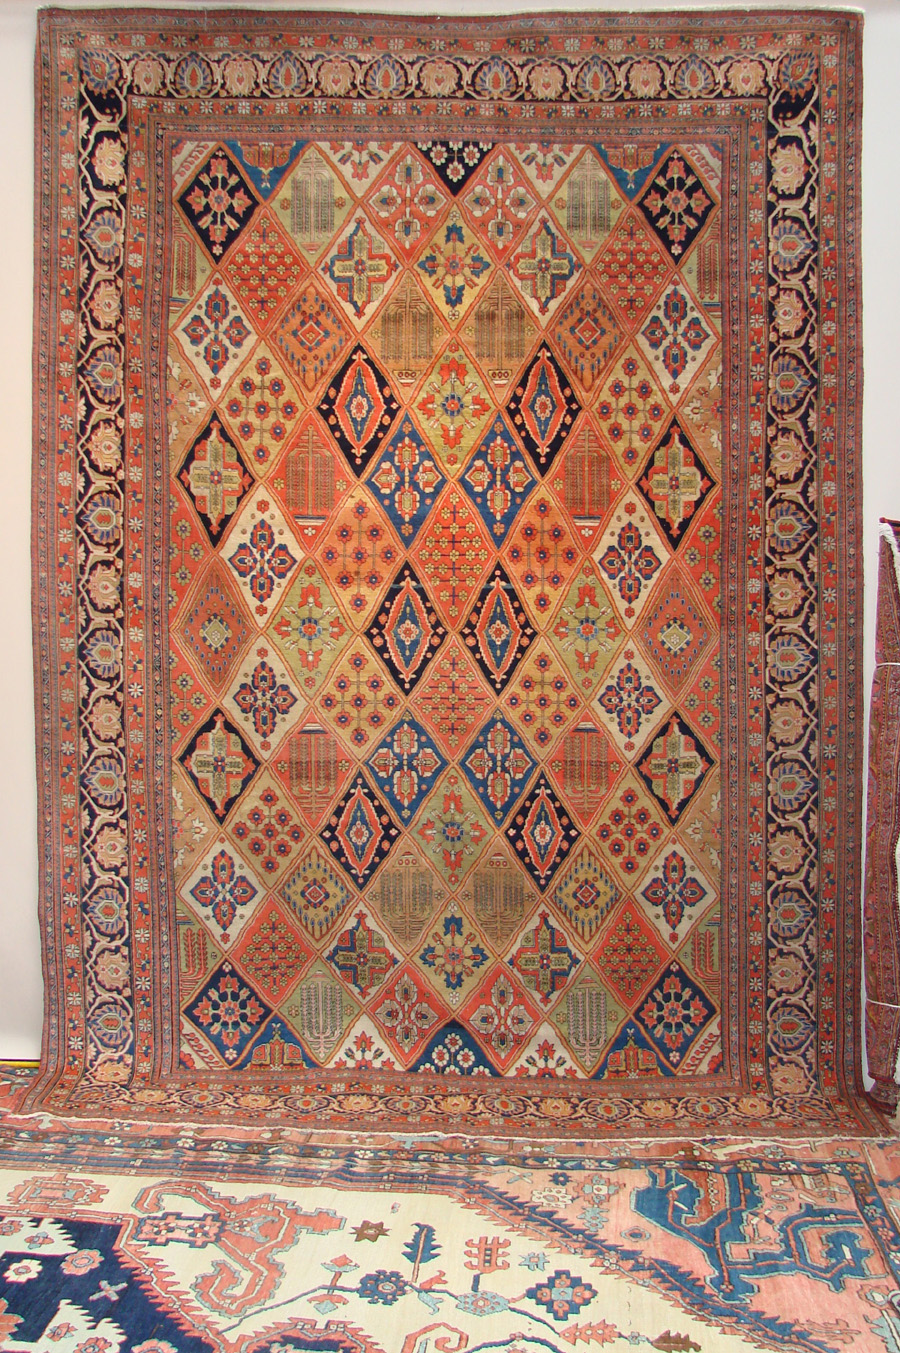 Doug Stock, Quadrifoglio Gallery, South Natick, Mass., offered an exceptionally fine Mohtashem Keshawn carpet. Made in Persia, circa 1880, it was one of the more expensive rugs in the show.